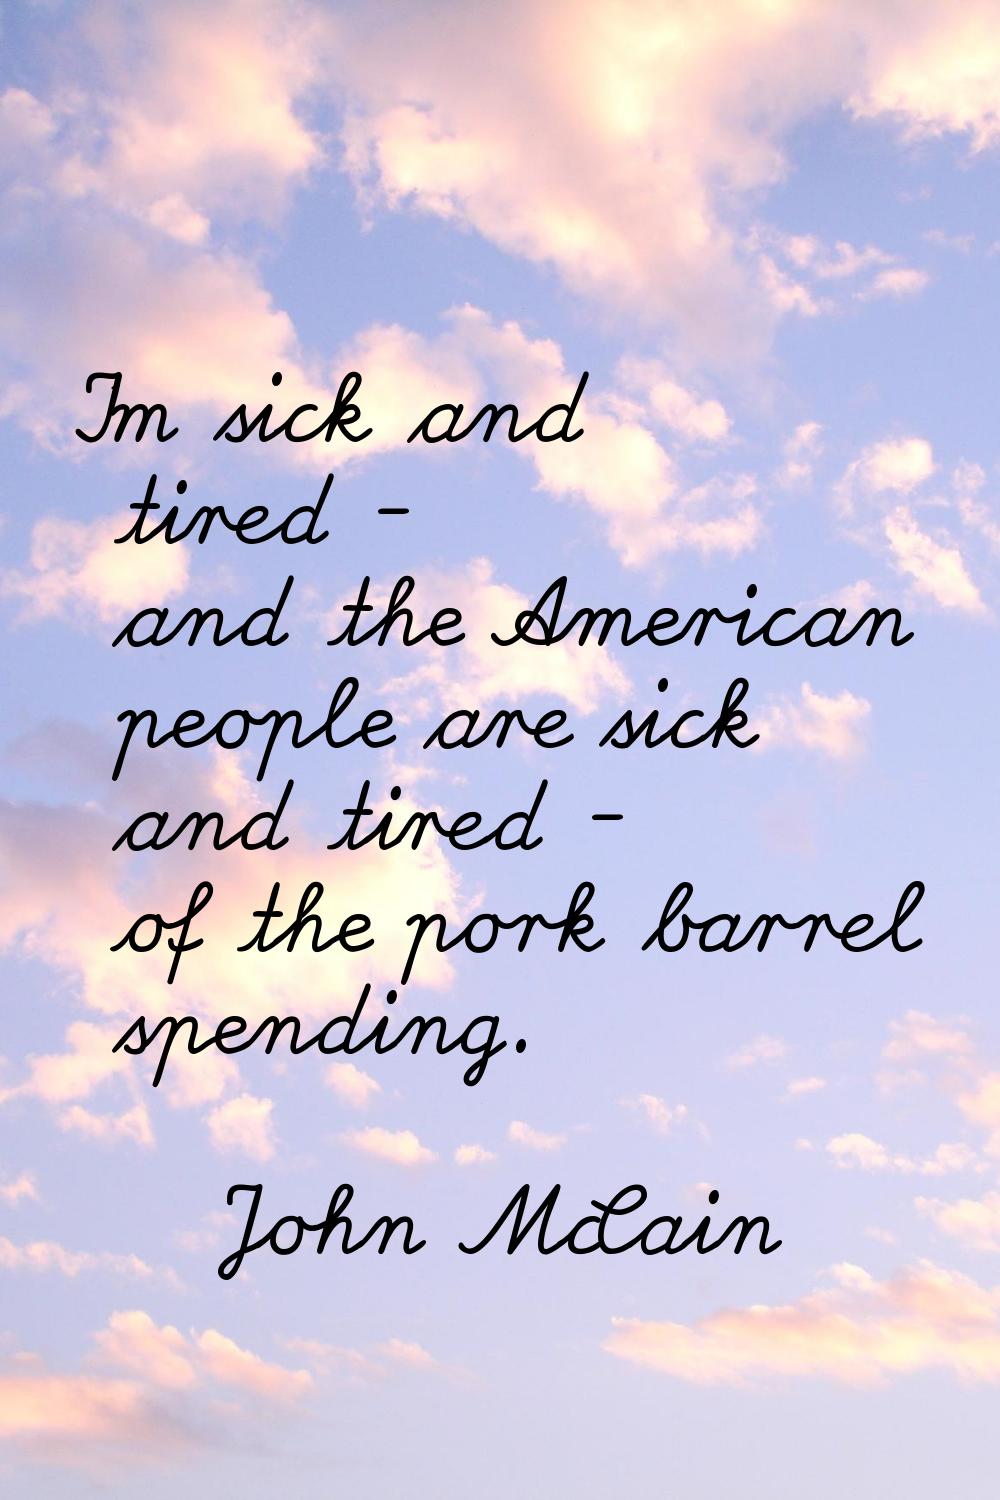 I'm sick and tired - and the American people are sick and tired - of the pork barrel spending.